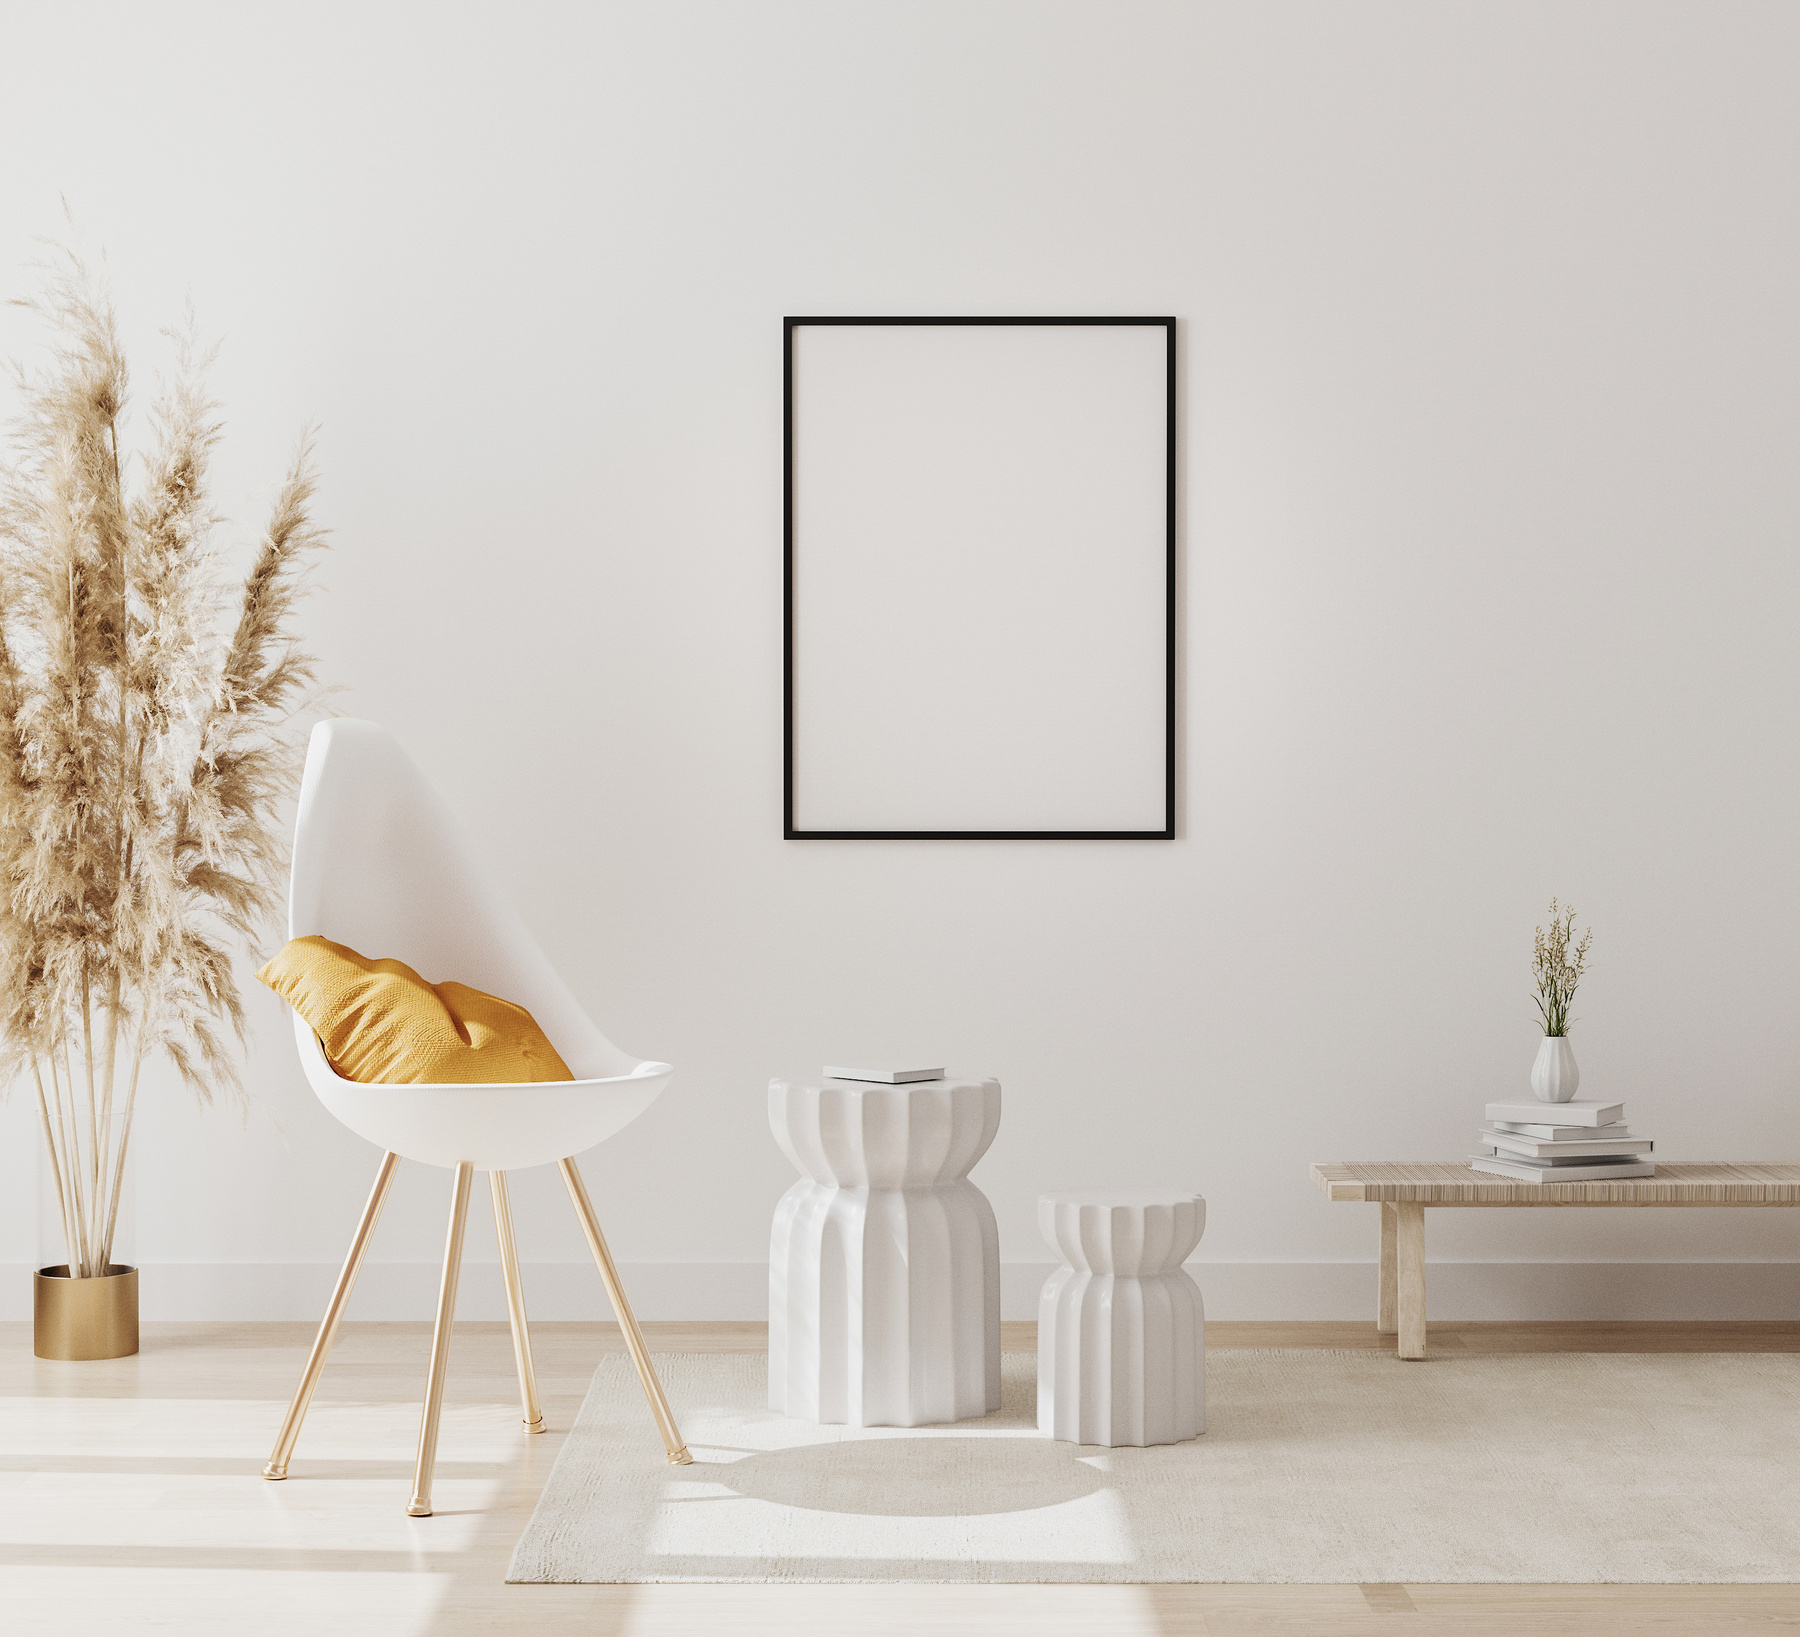 Blank Vertical Picture Frame Mockup in Modern Interior Backgroun